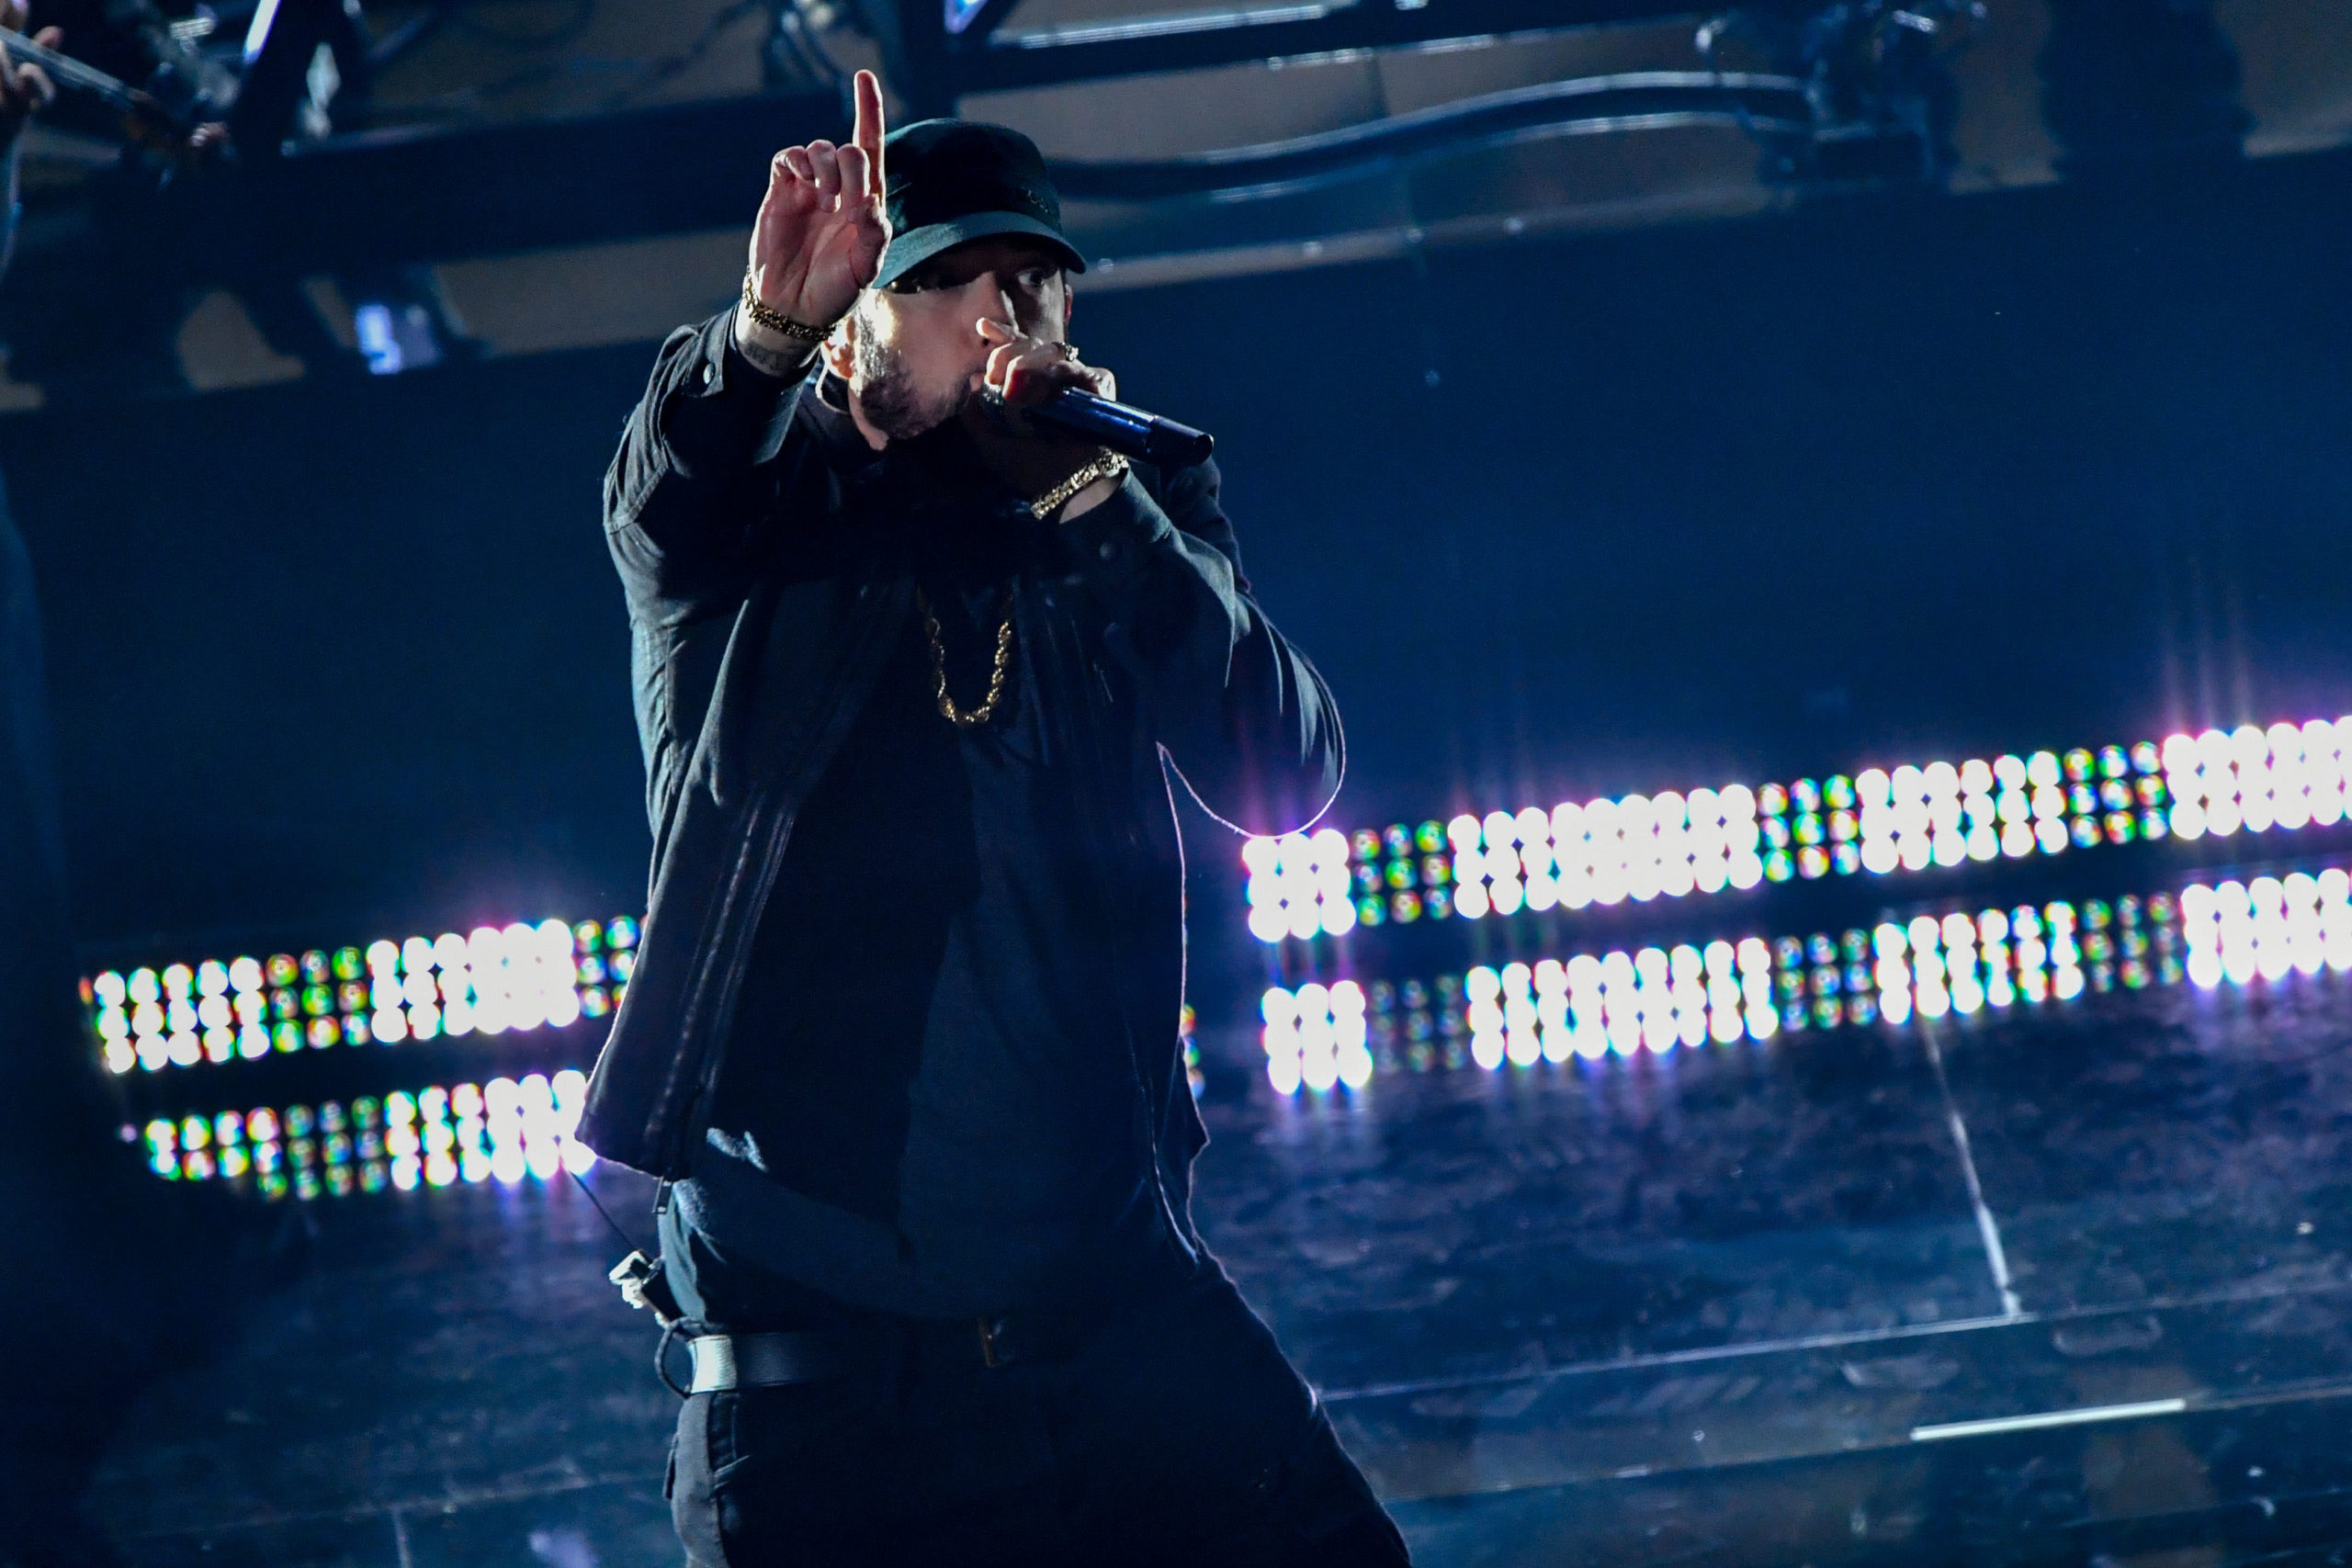 Eminem surprises with efficiency of ‘Lose Your self’